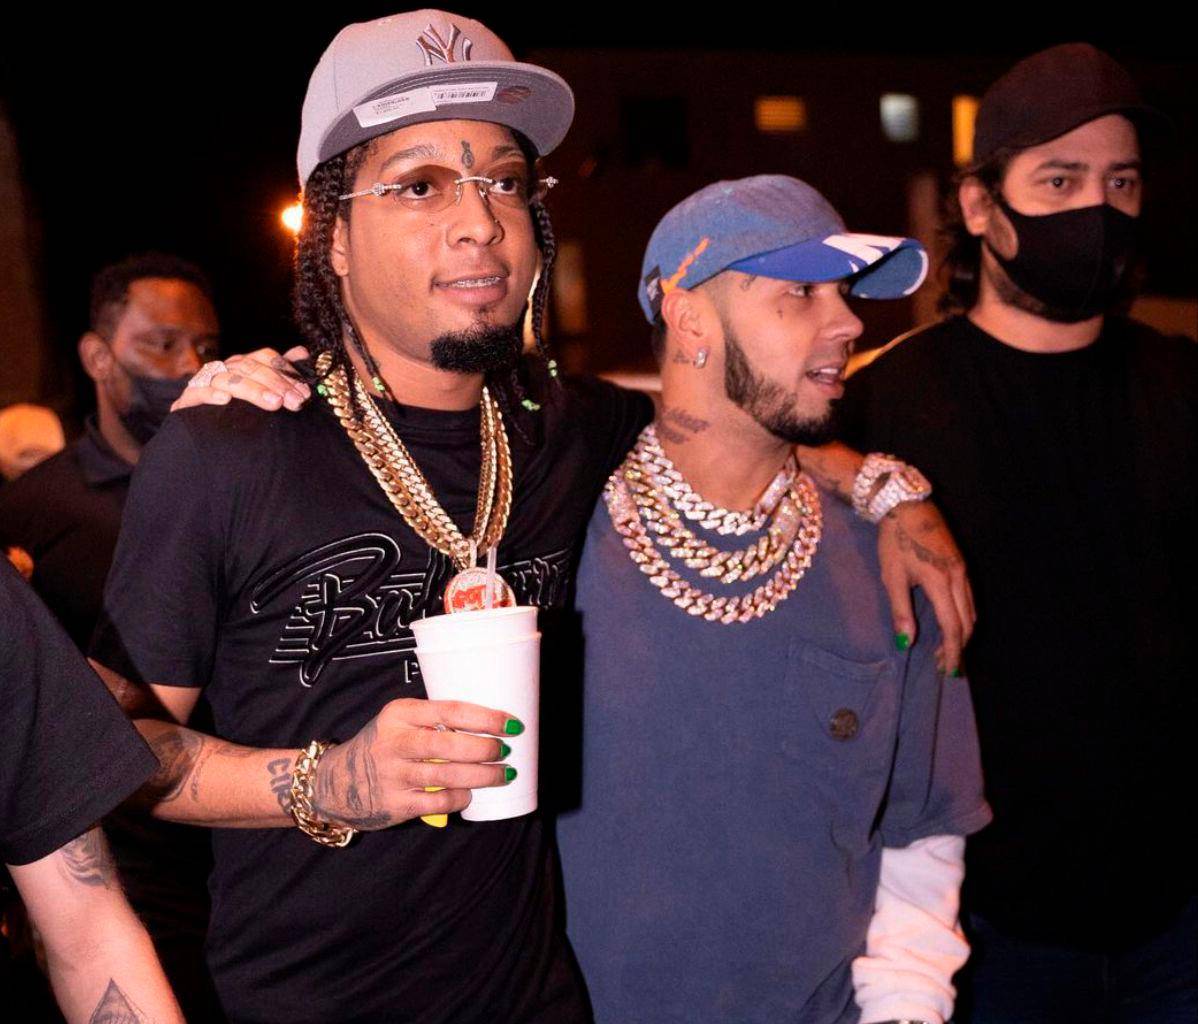 Anuel AA comes to the neighborhood to record with Rochy RD and promises to get his visa